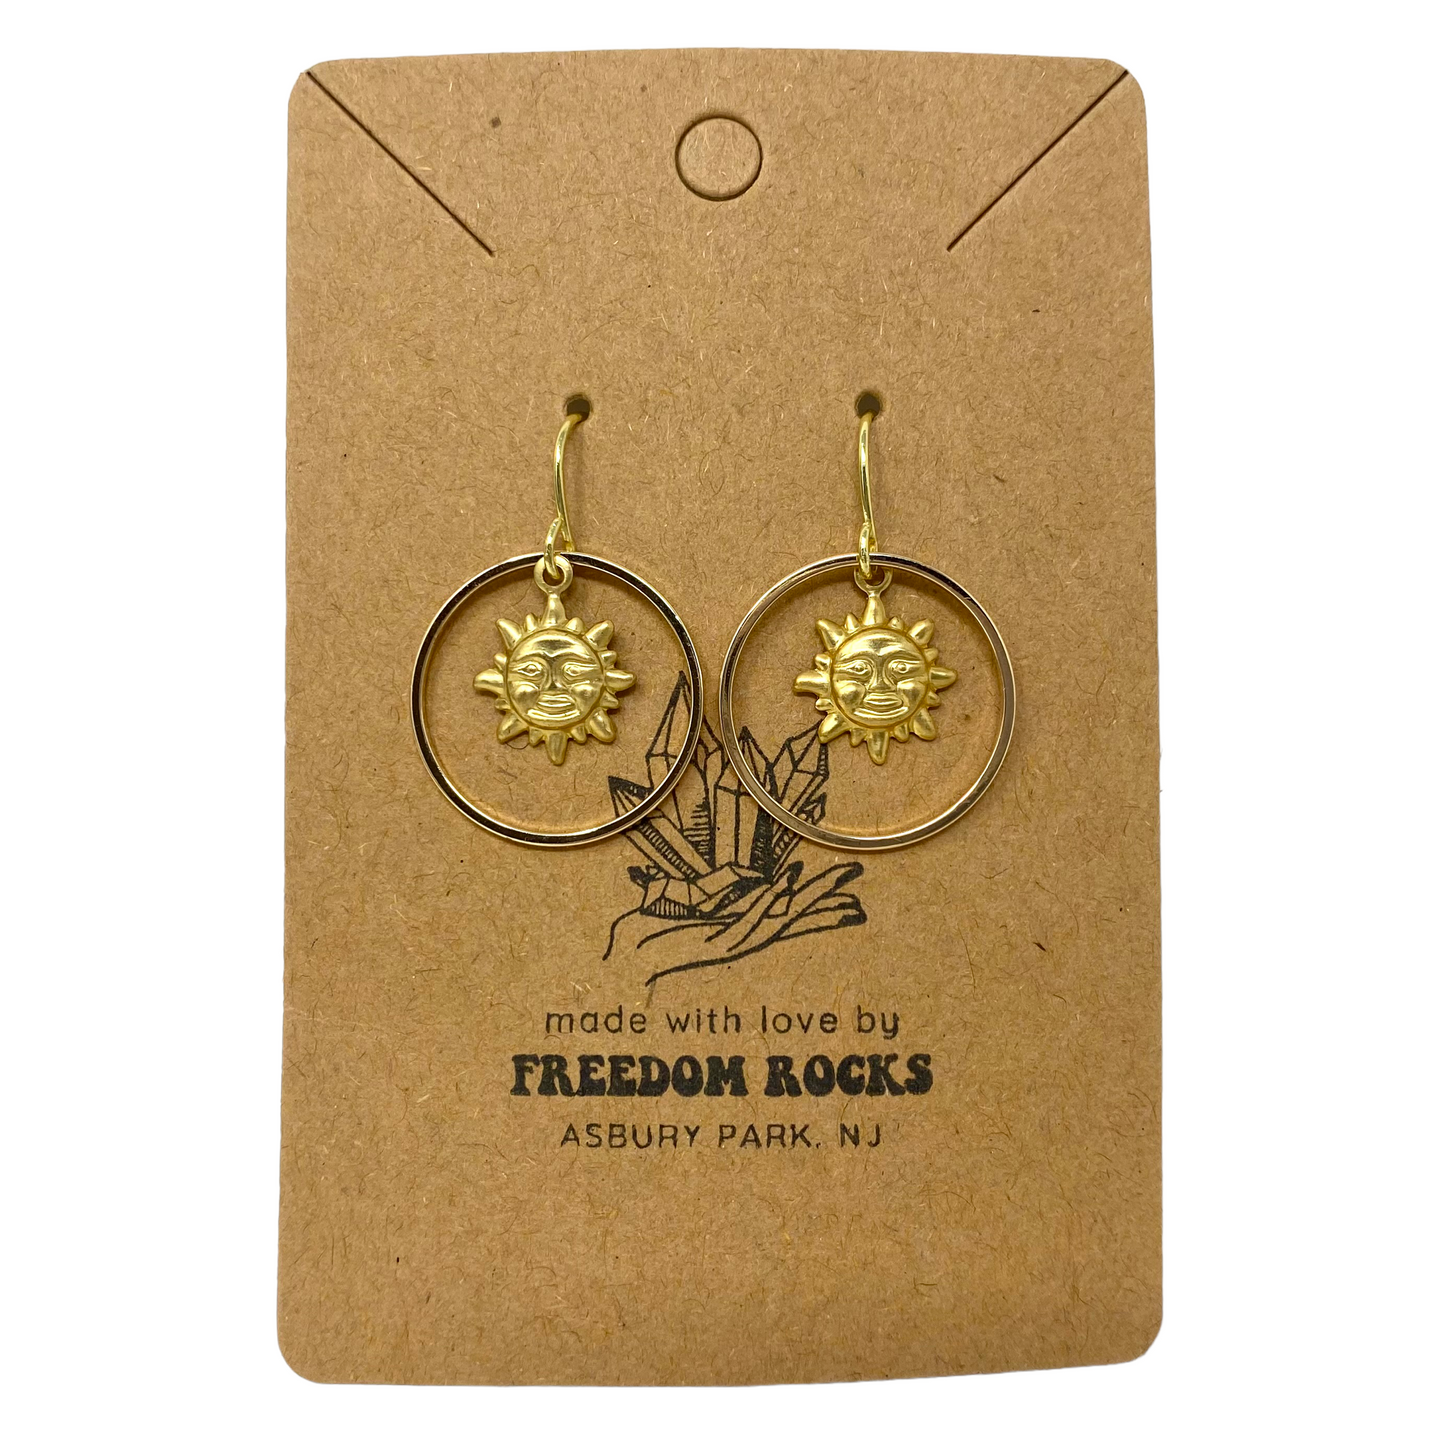 Gold Plated Hoop Earrings with Brass Sun Charm